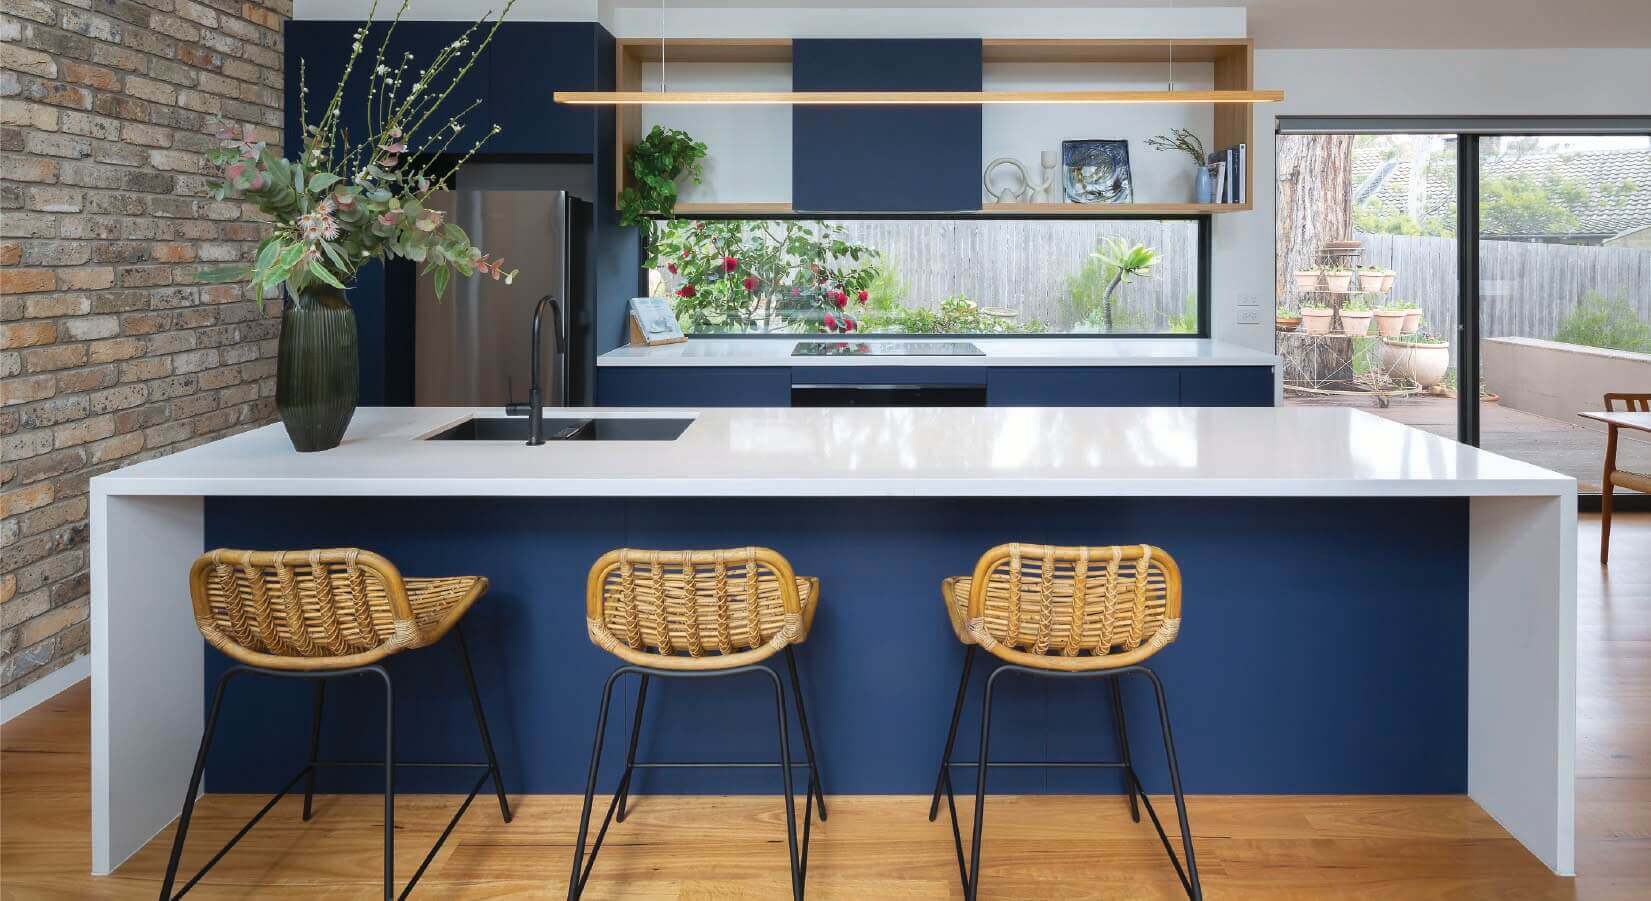 Before and After: Brass and Navy Pair Nicely in the Kitchen